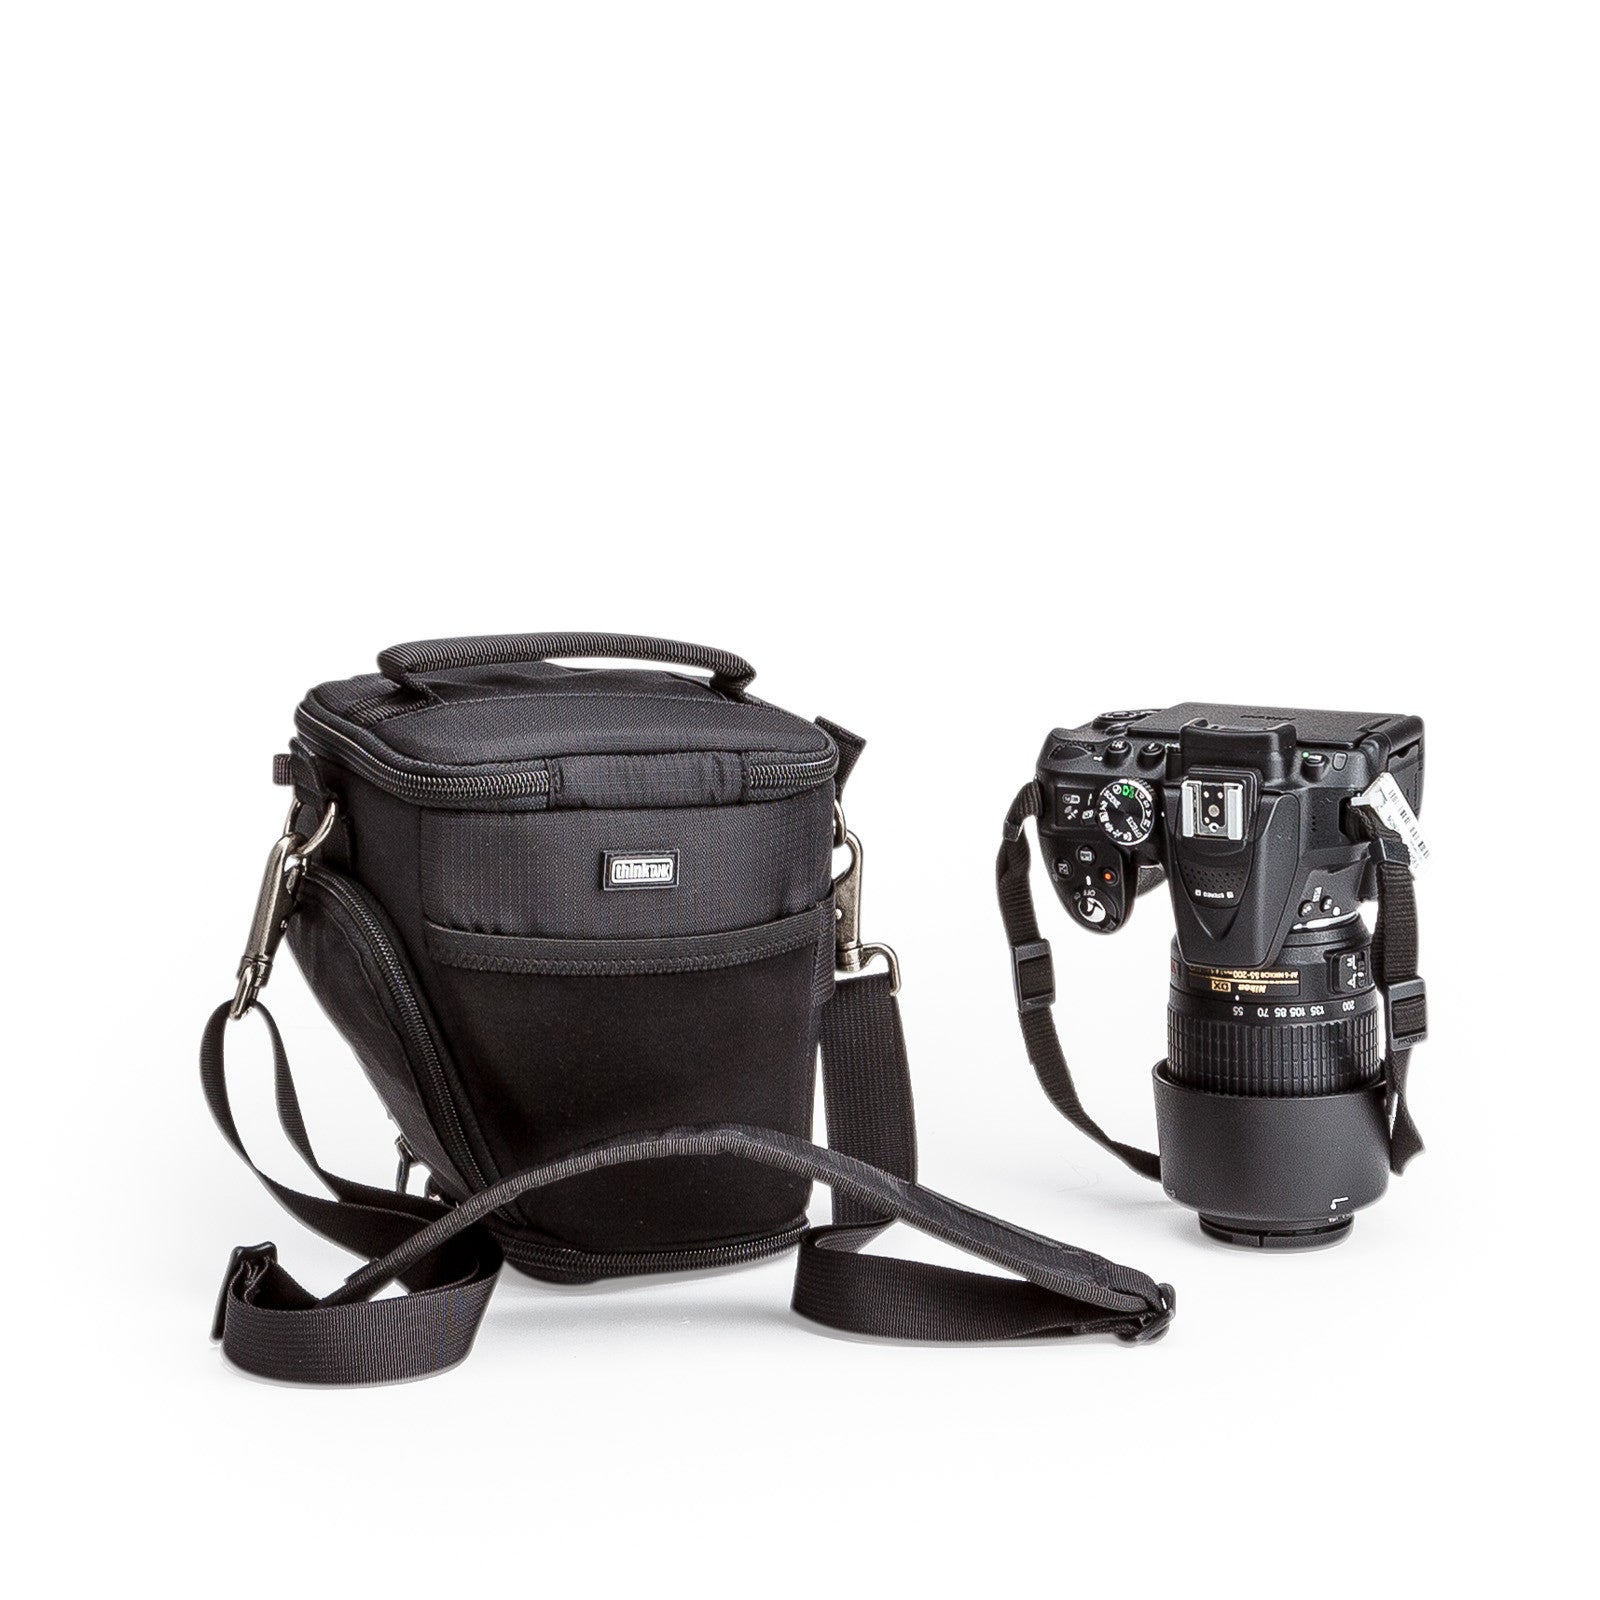 Nikon D3300 DSLR Kit with 18-55mm VR II & 55-200mm VR II Lens & shell -  photo/video - by owner - electronics sale -...